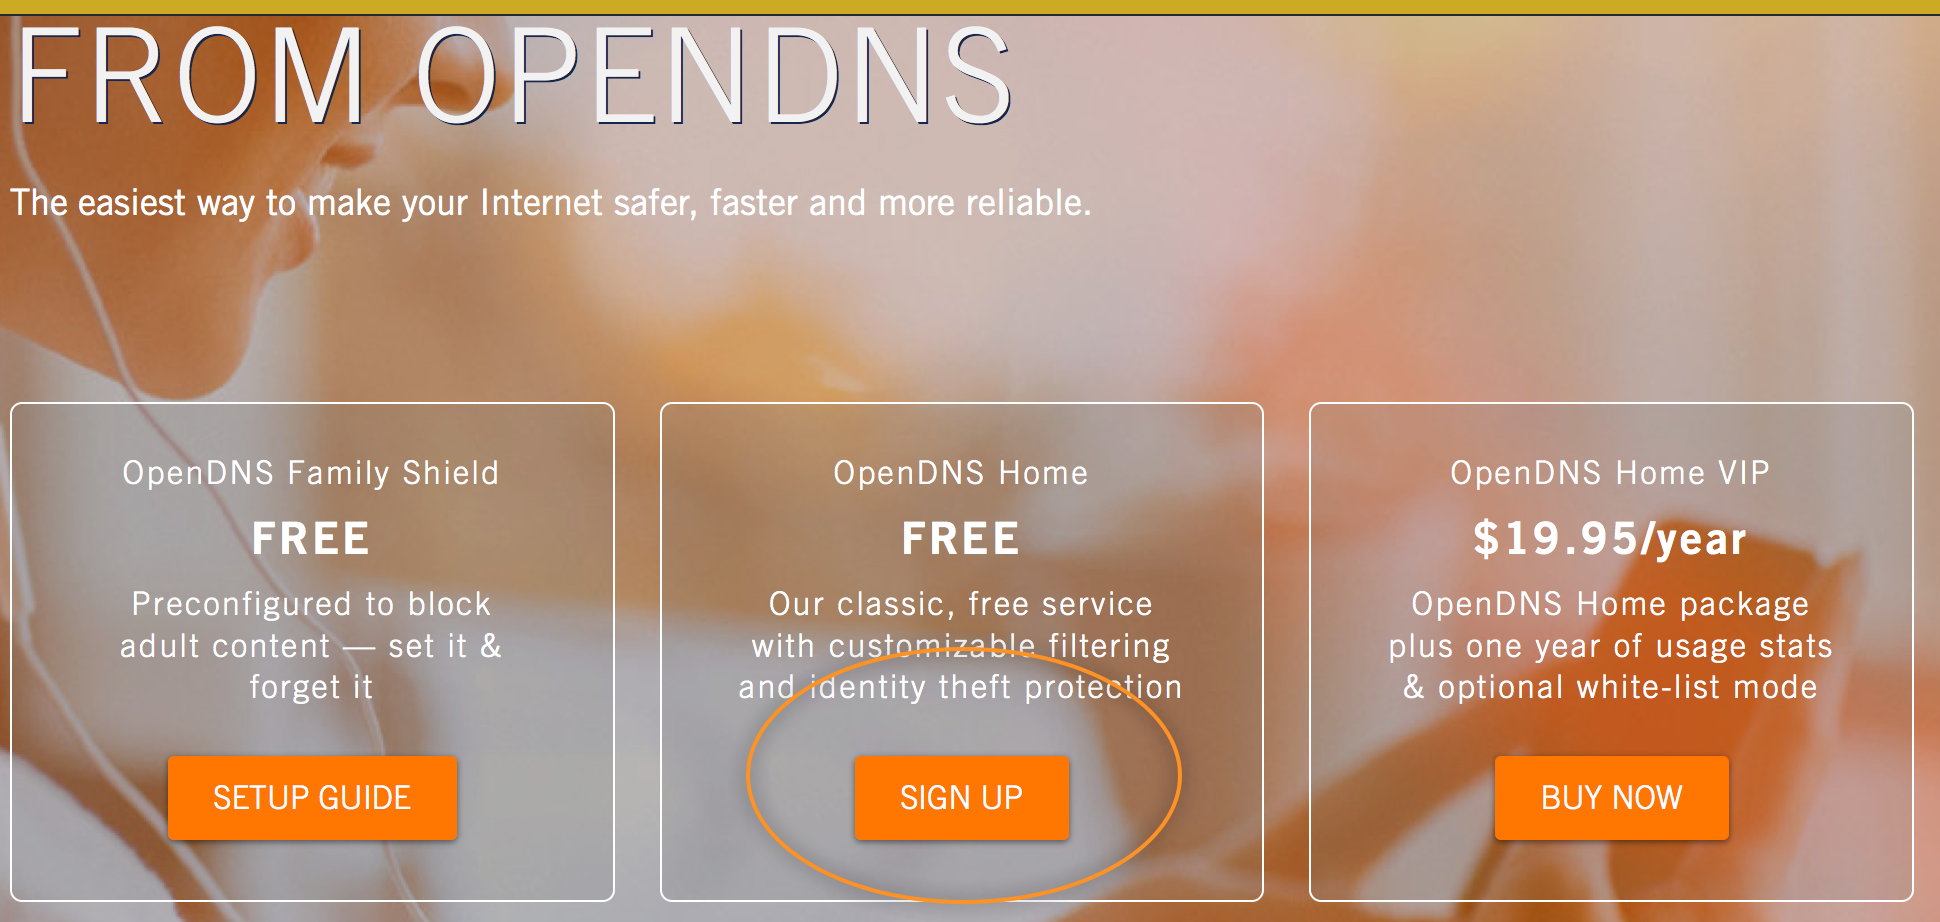 OpenDNS Home VIP Review